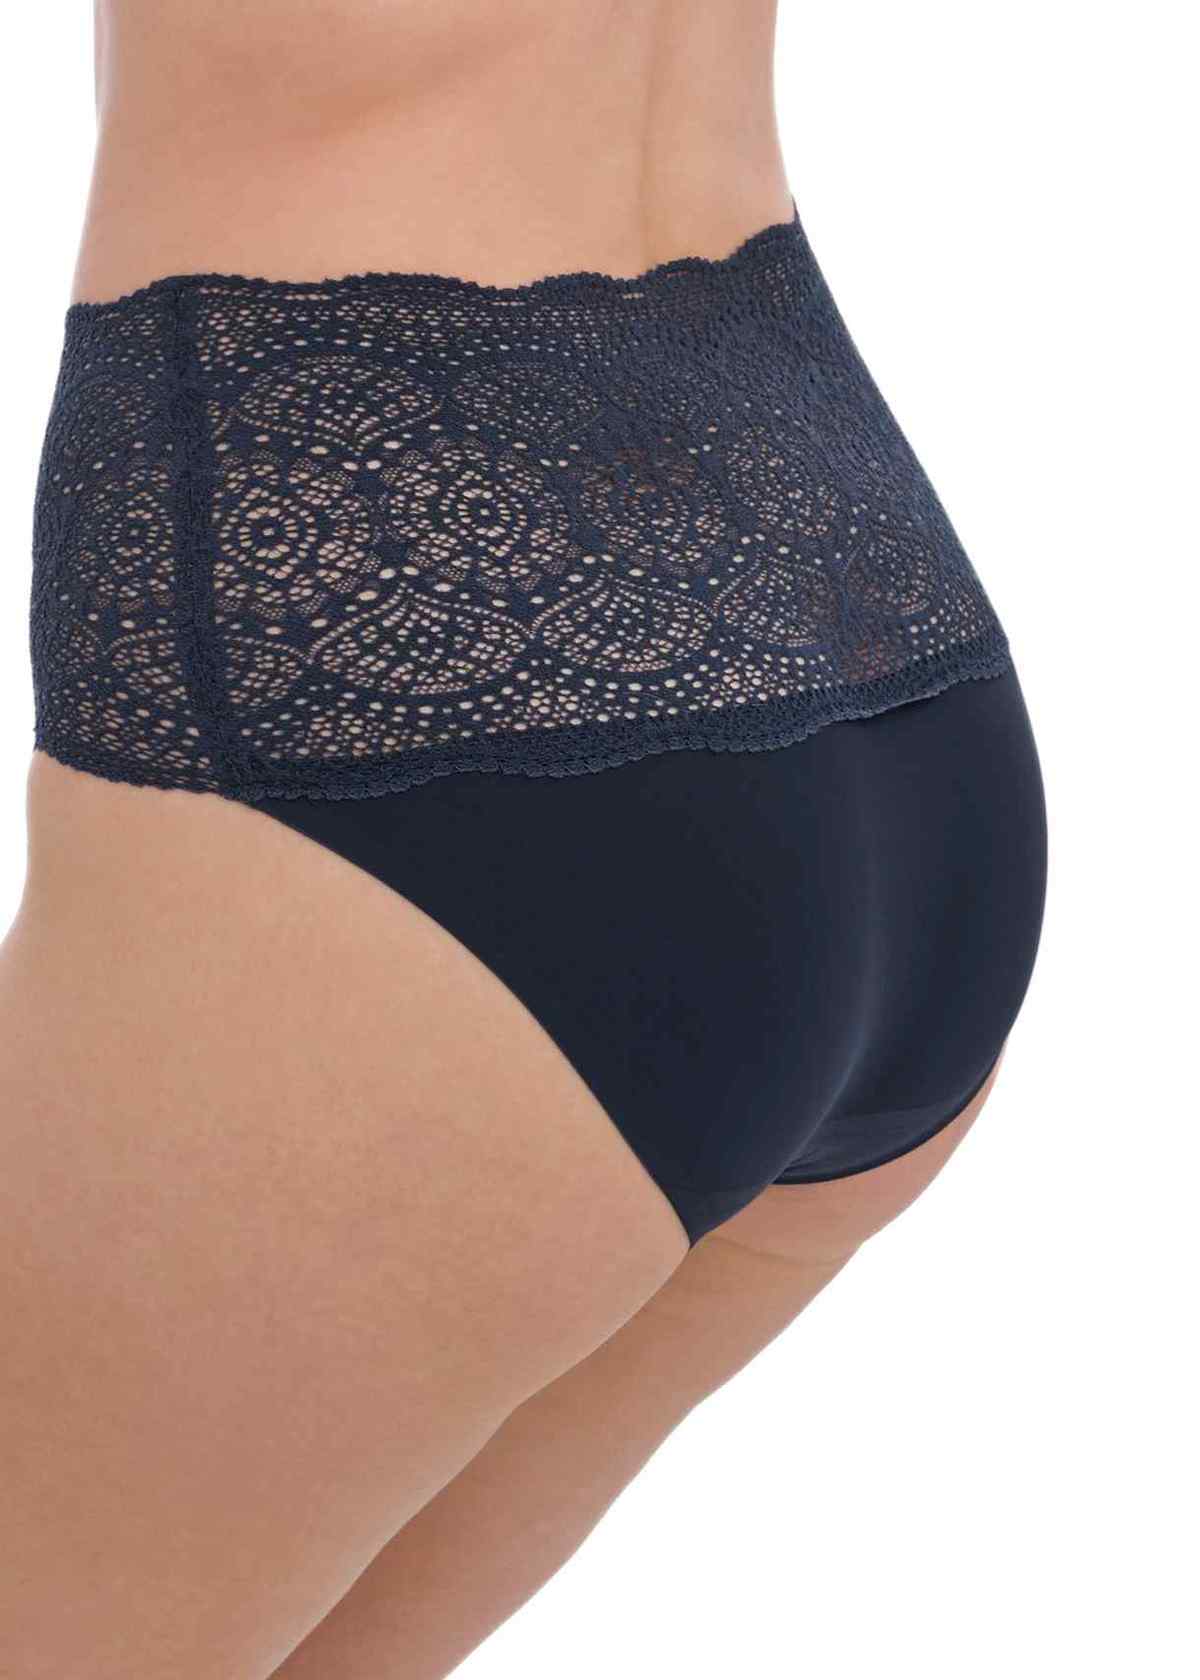 Fantasie Invisible Red Stretch Lace Full Brief Panty 2330 – The